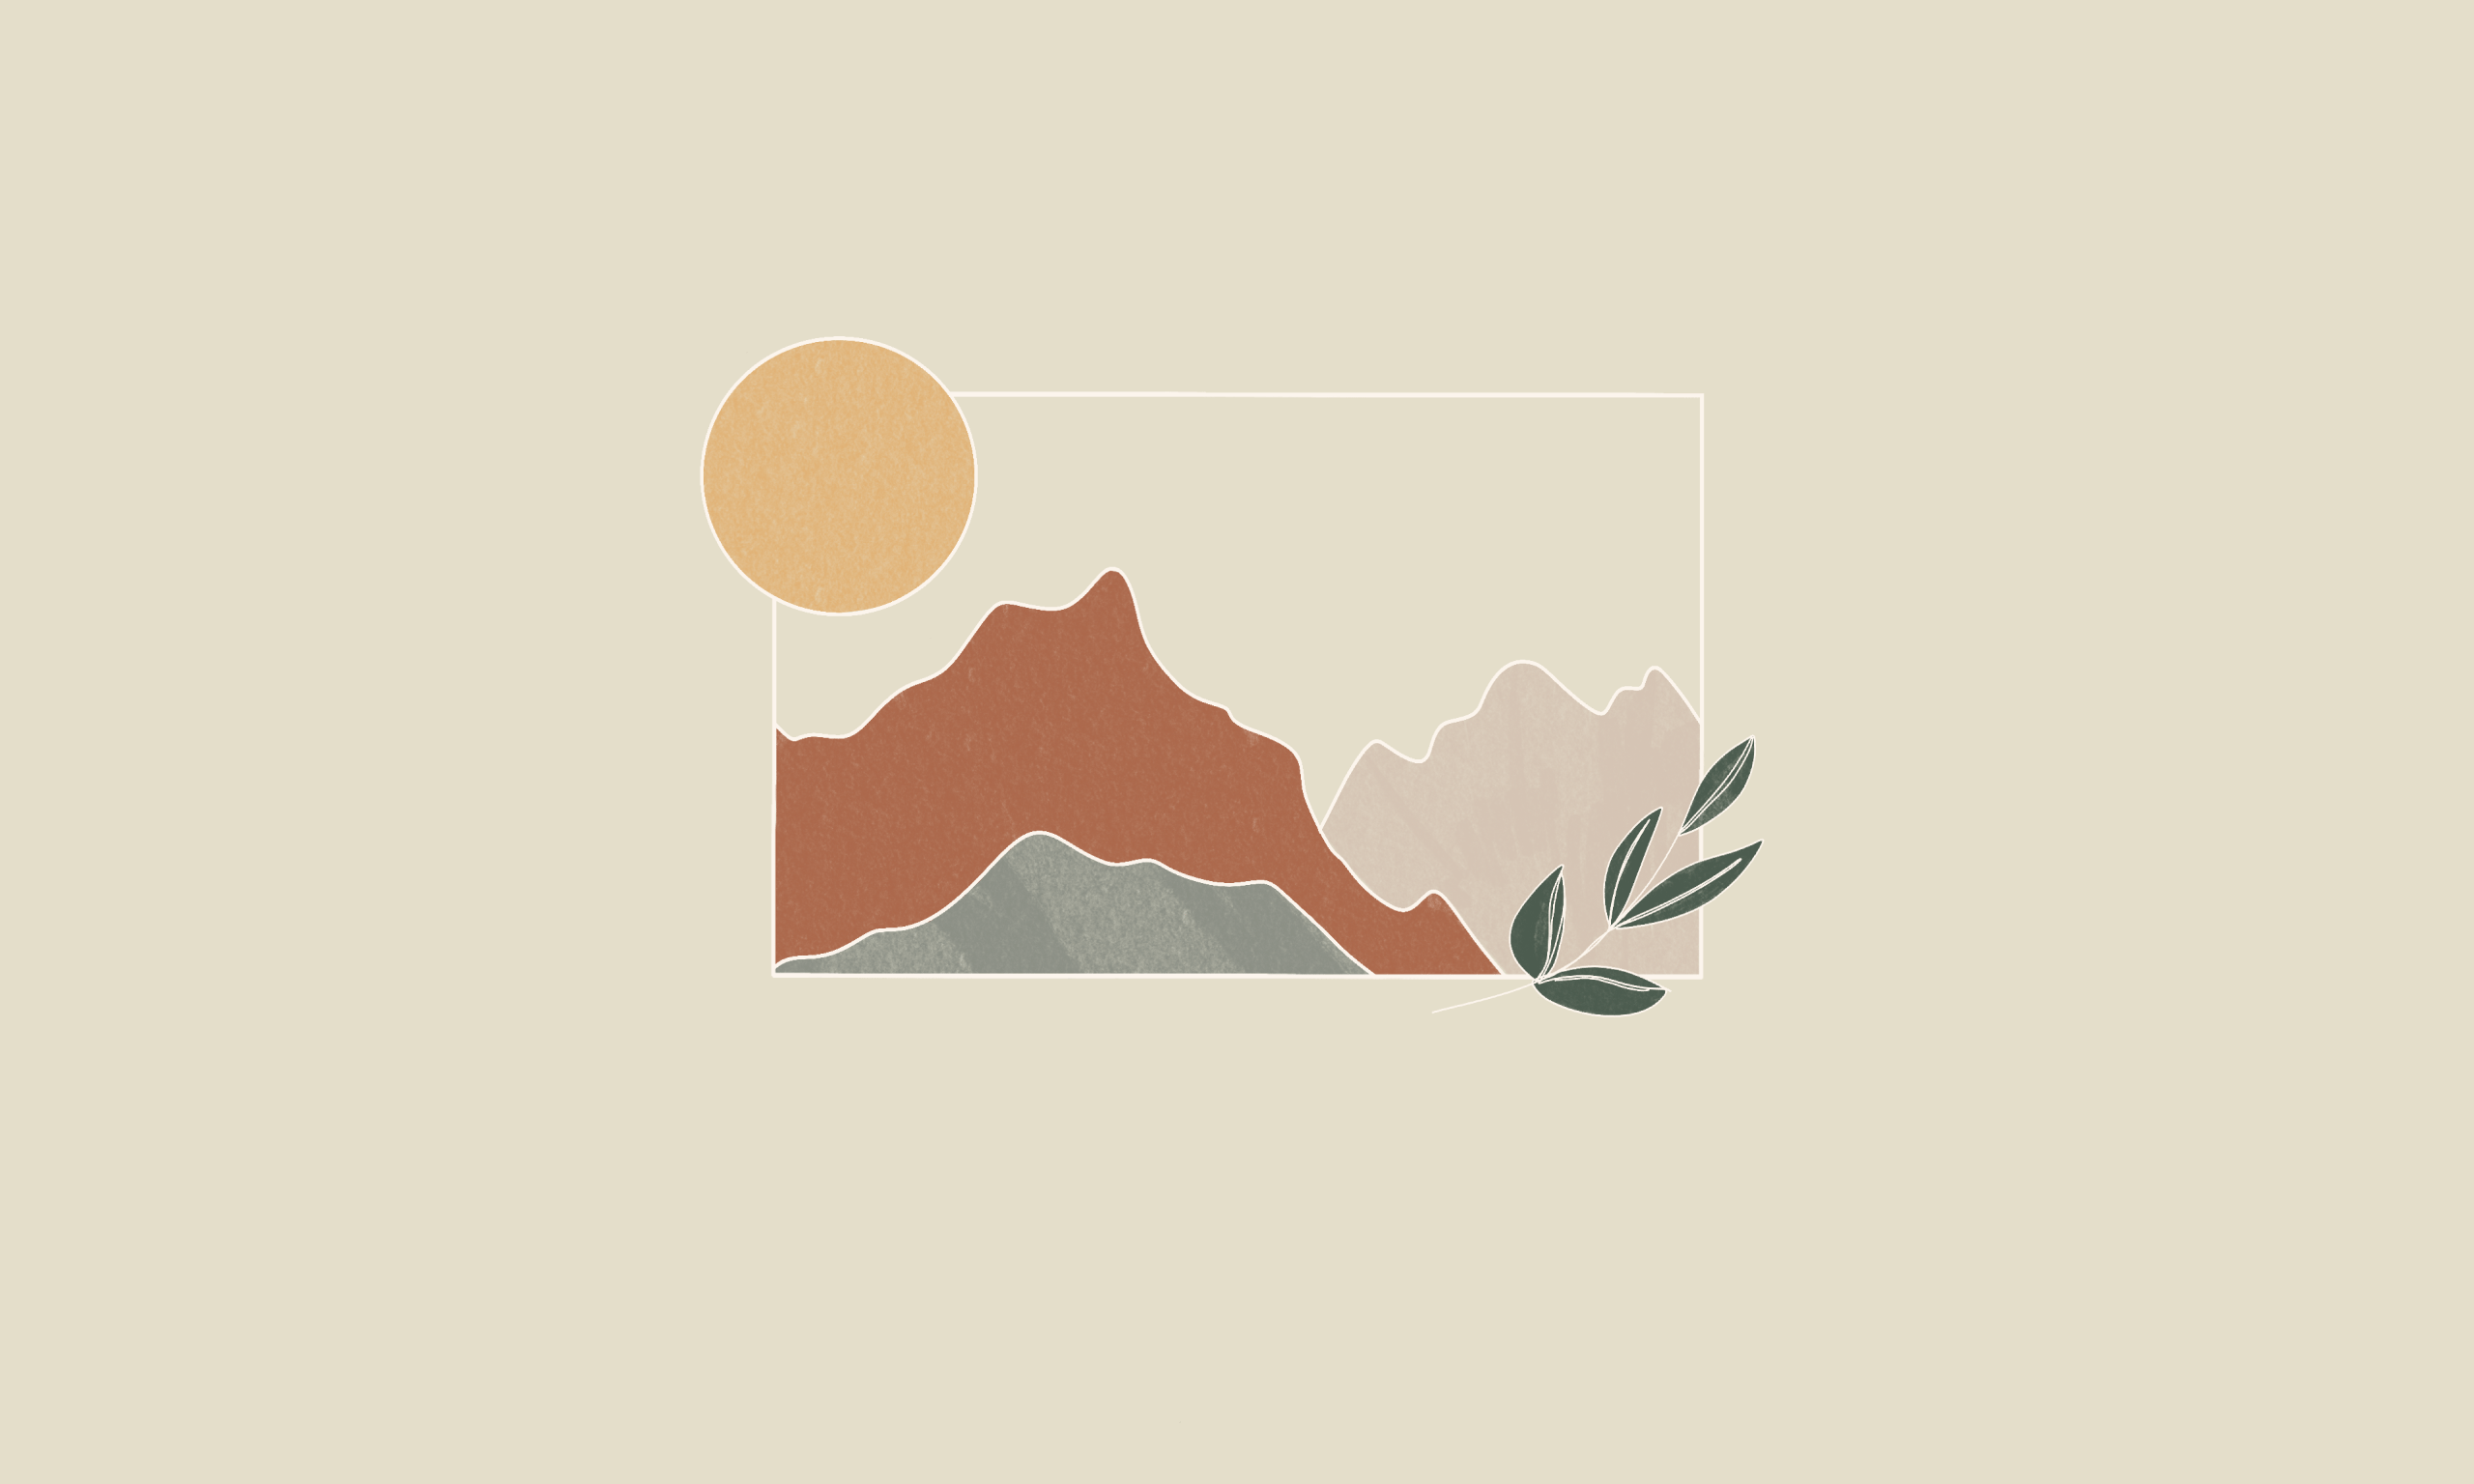 A mountain landscape with leaves and sun - Minimalist